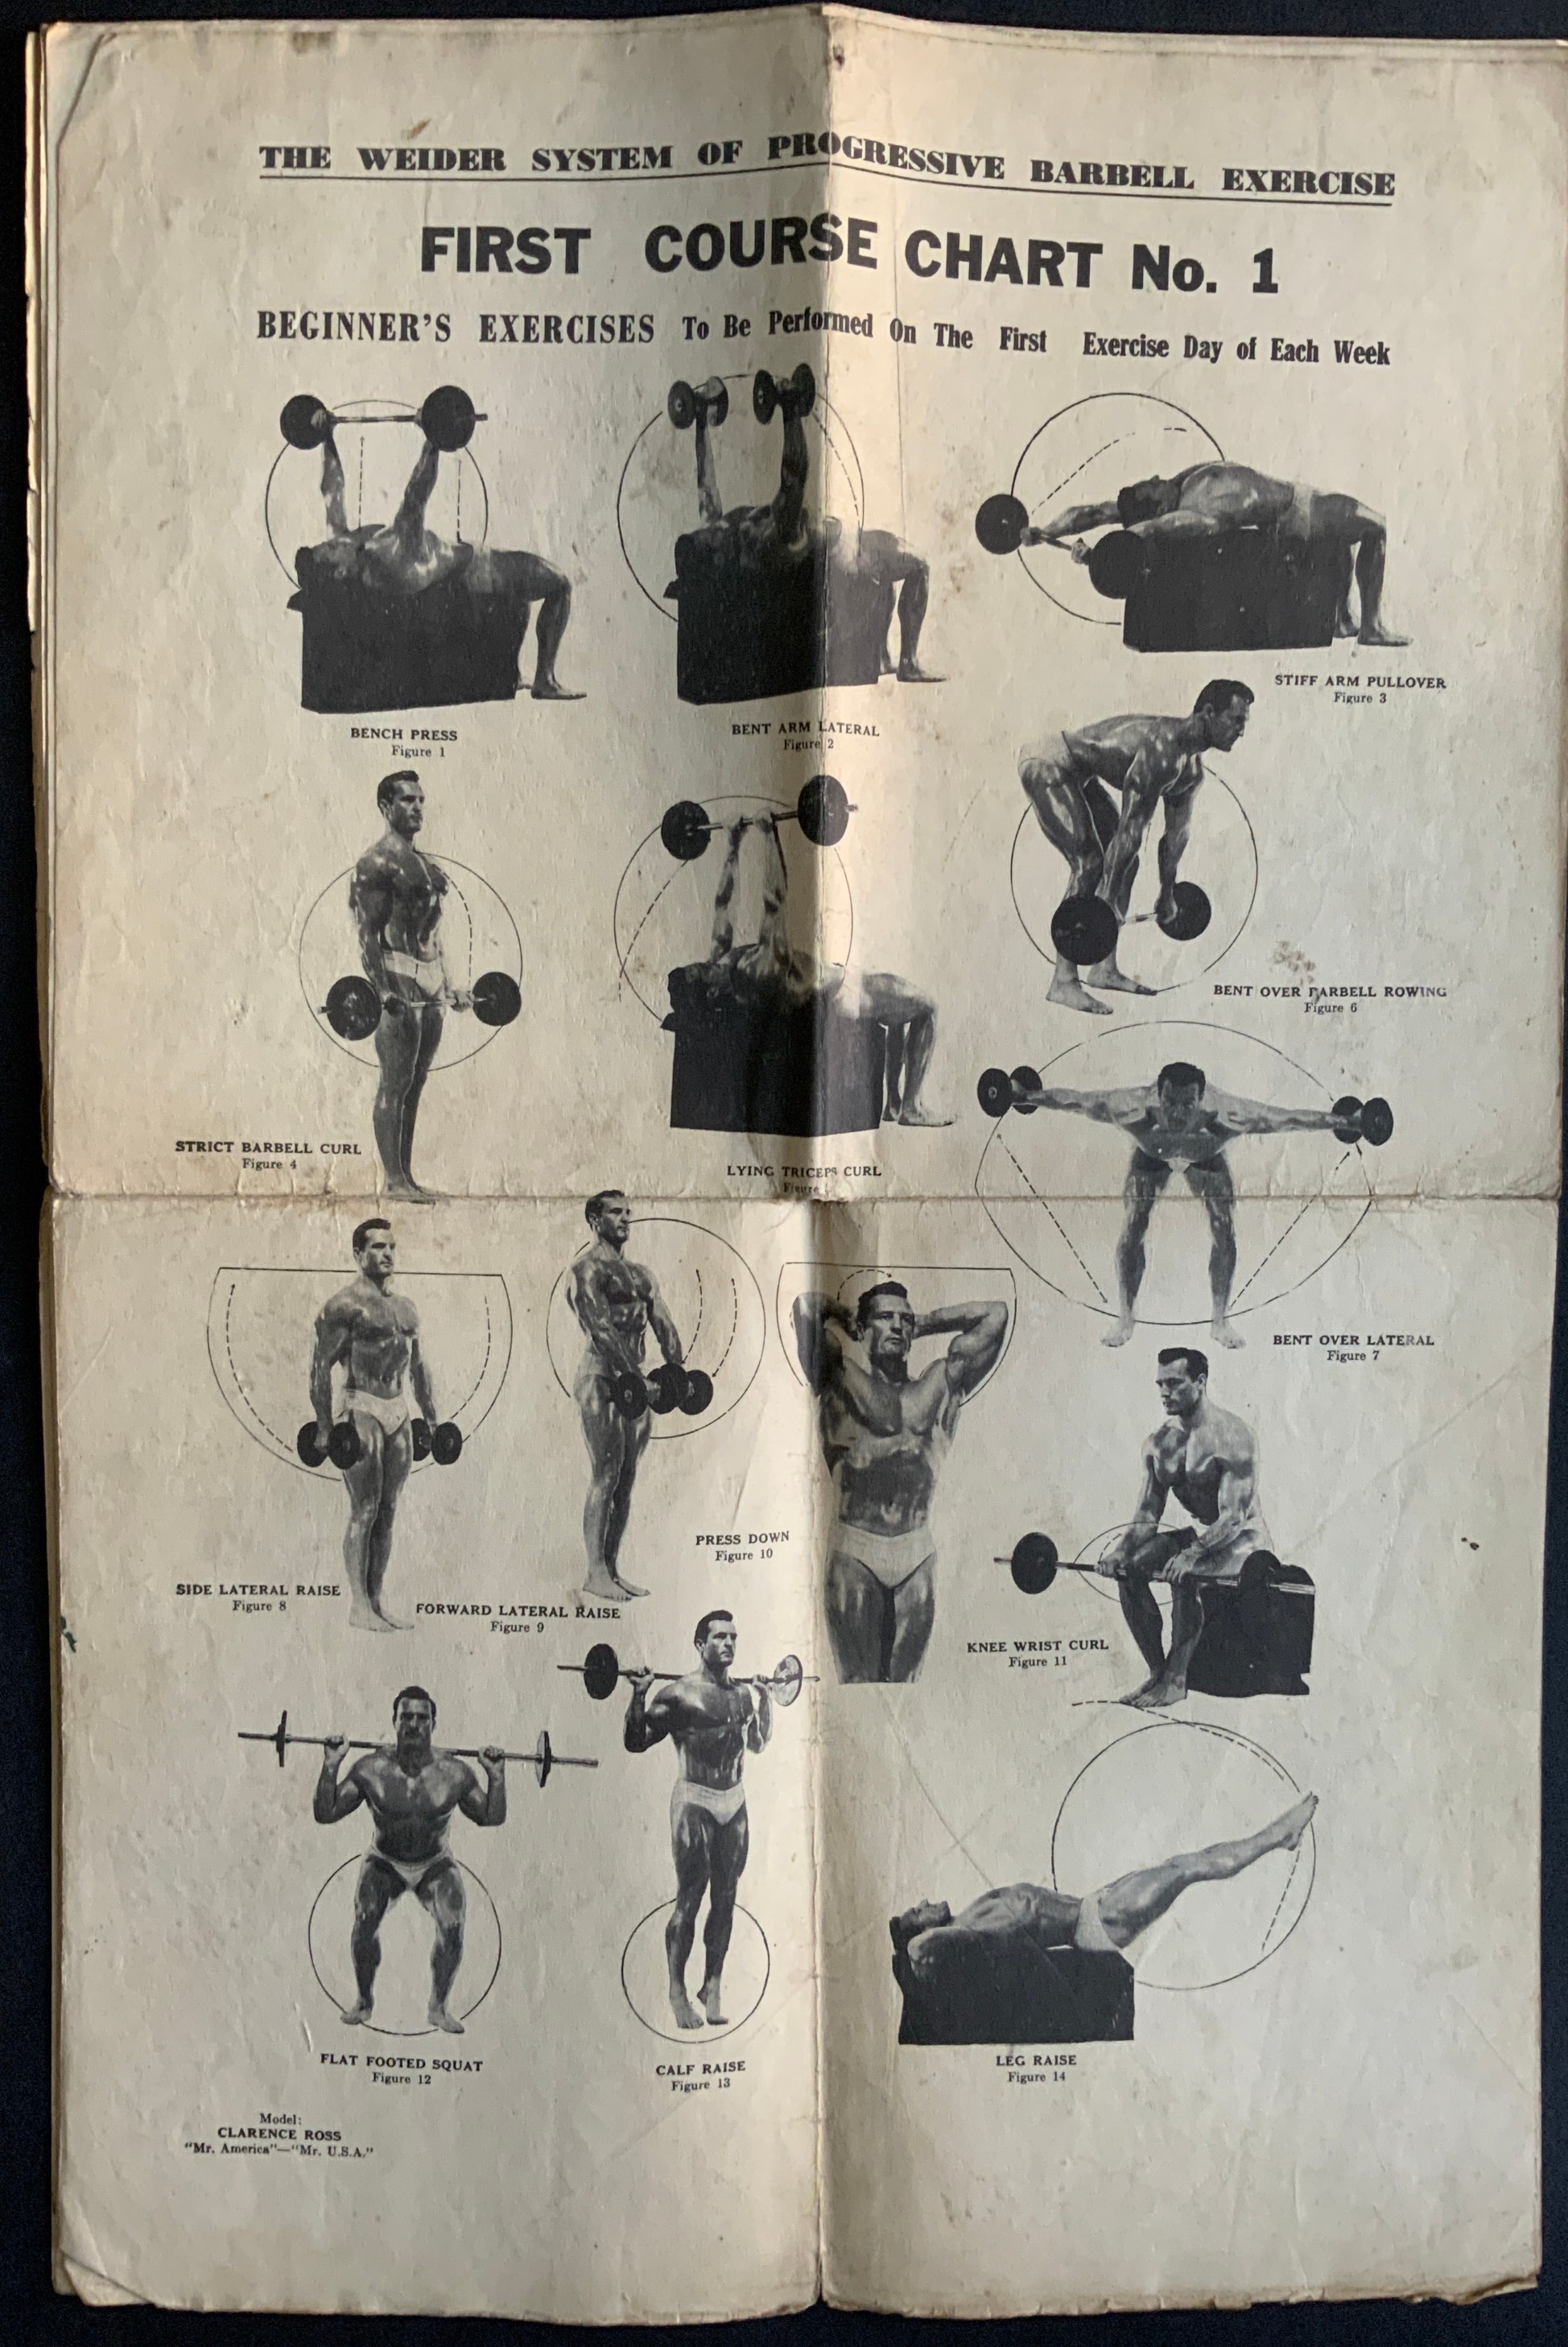 SIX THE WEIDER SYSTEM OF PROGRESSIVE BARBELL EXERCISE FIRST COURSE CHARTS